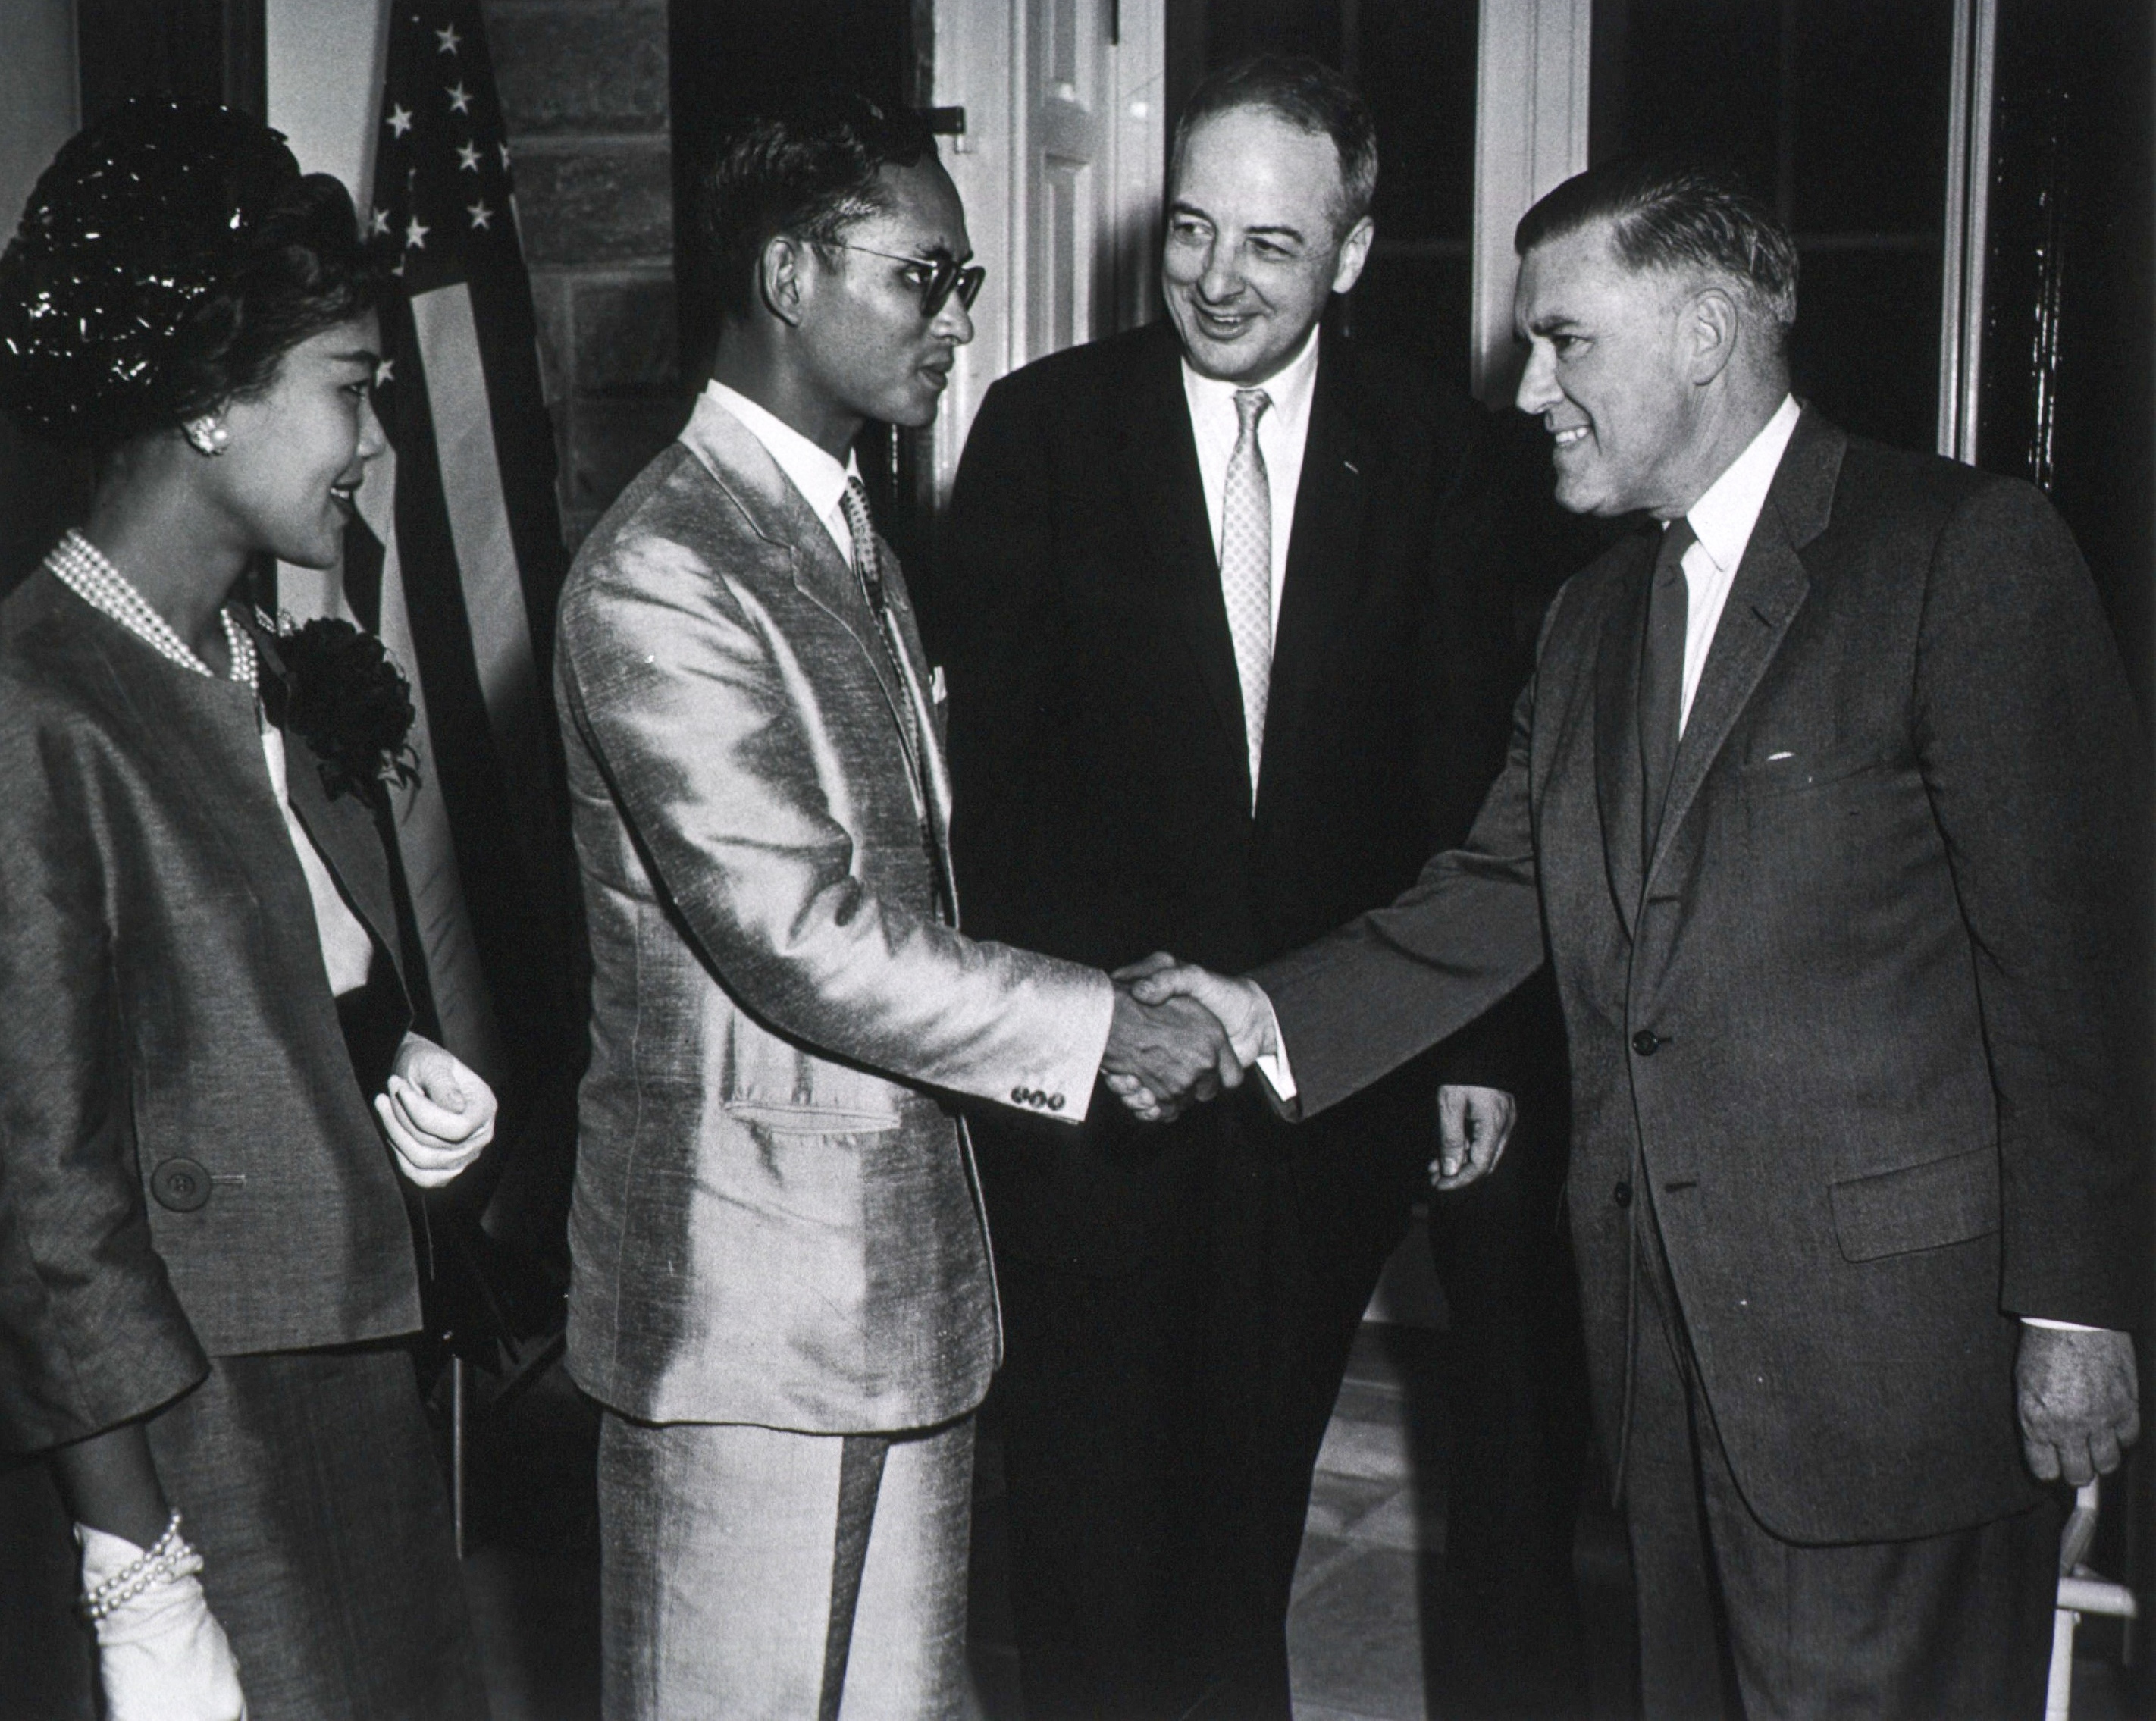 The king of Thailand shaking hands with Roderick Murray